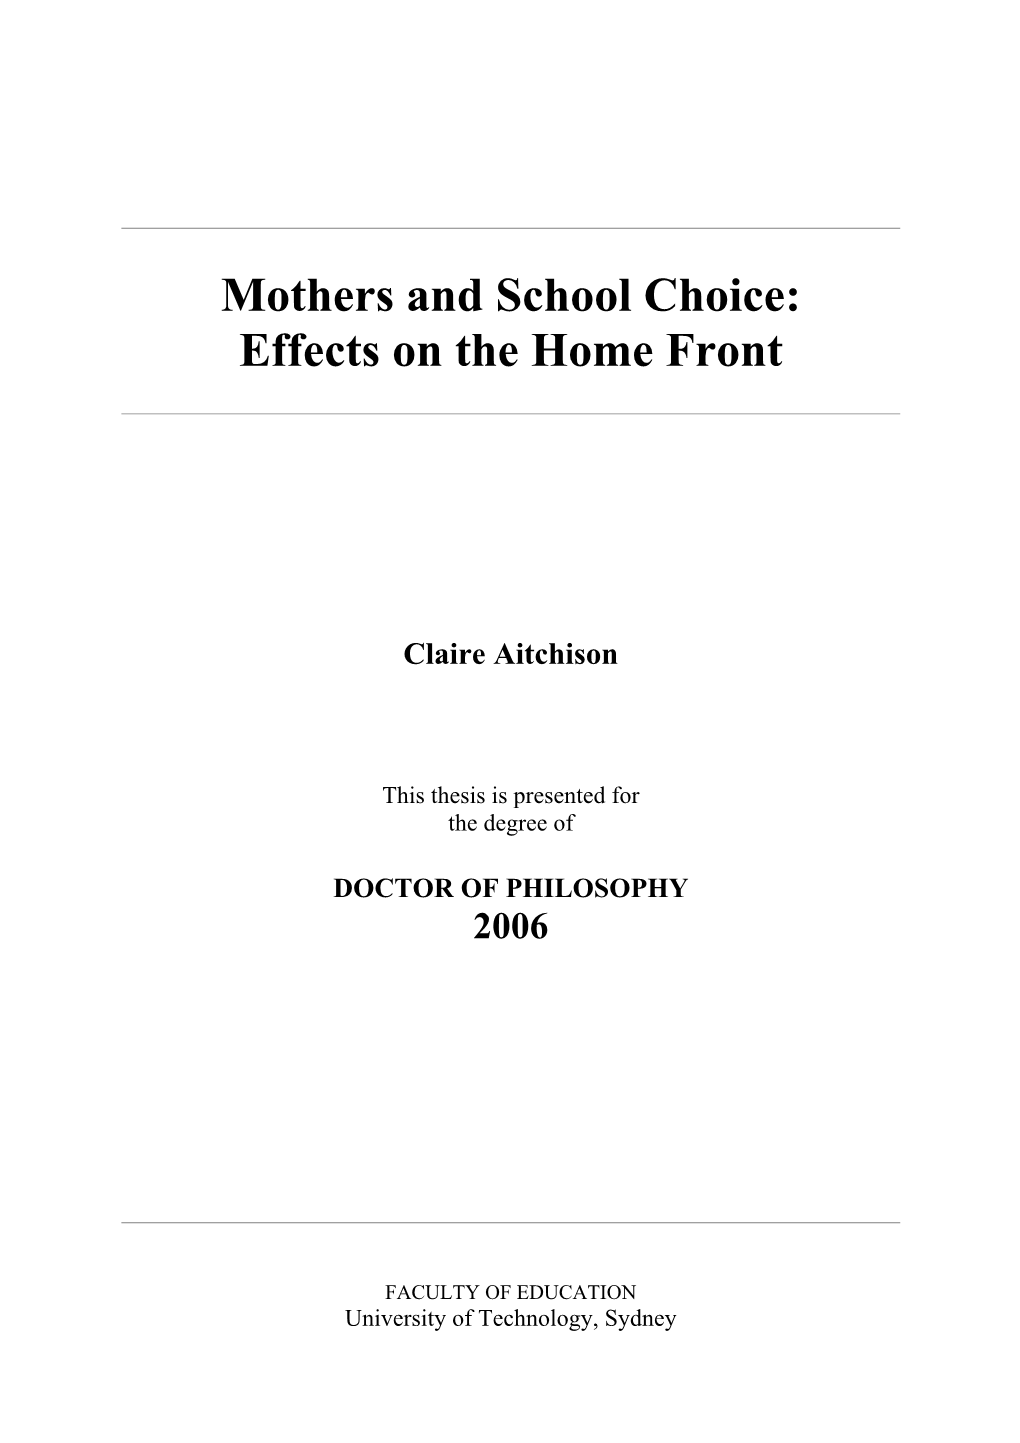 Mothers and School Choice: Effects on the Home Front